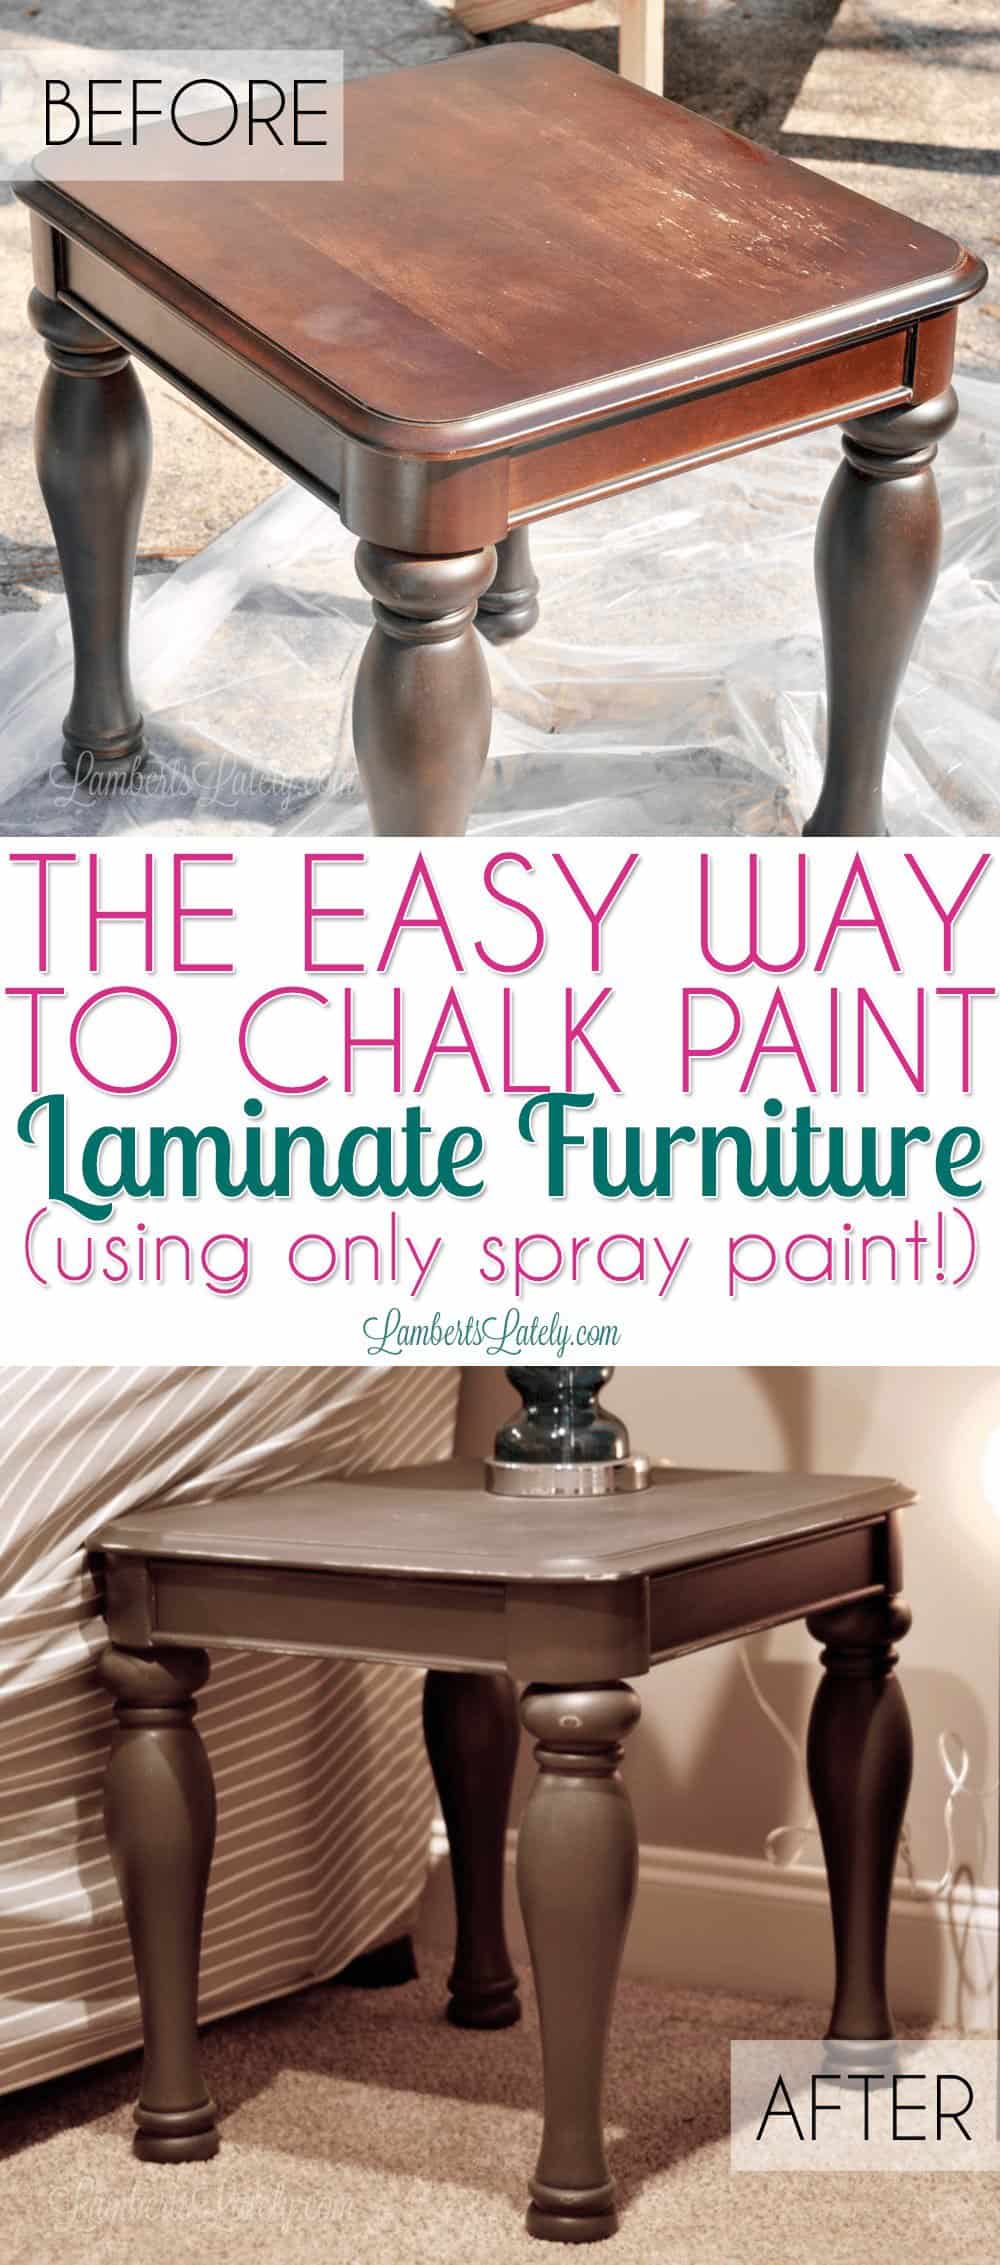 Great tutorial on how to chalk paint laminate furniture - in this tutorial, she uses only spray paint to refinish cheap, damaged laminate wood!